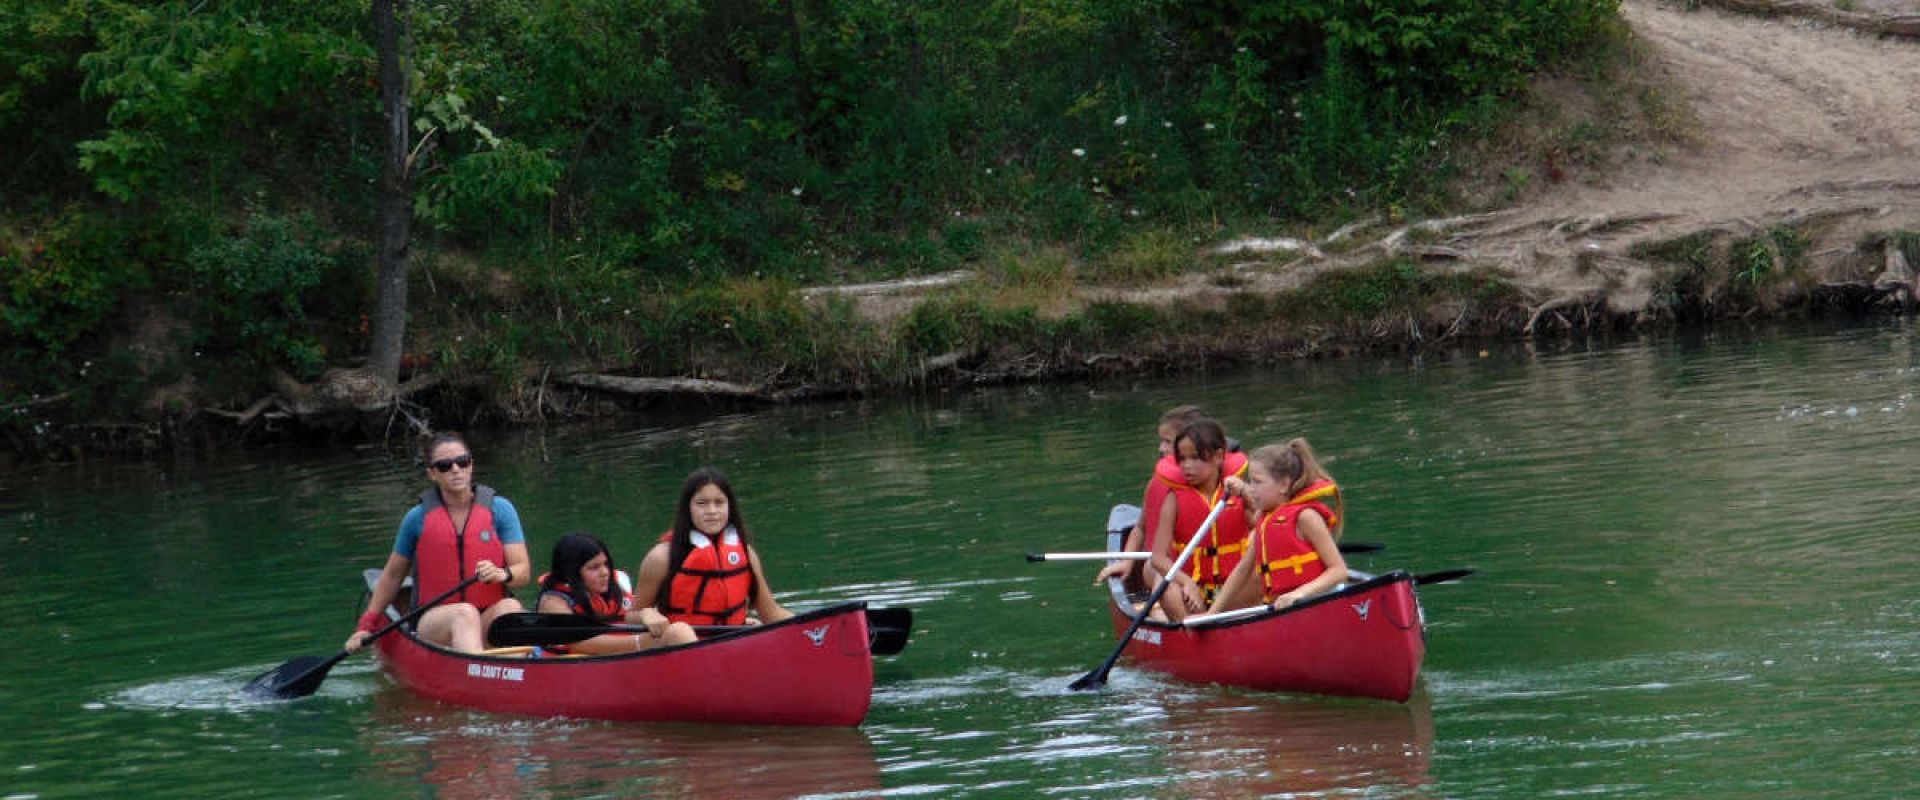 Children accompanied by an adult paddling two red canoes on the Sharon Creek Reservoir. 